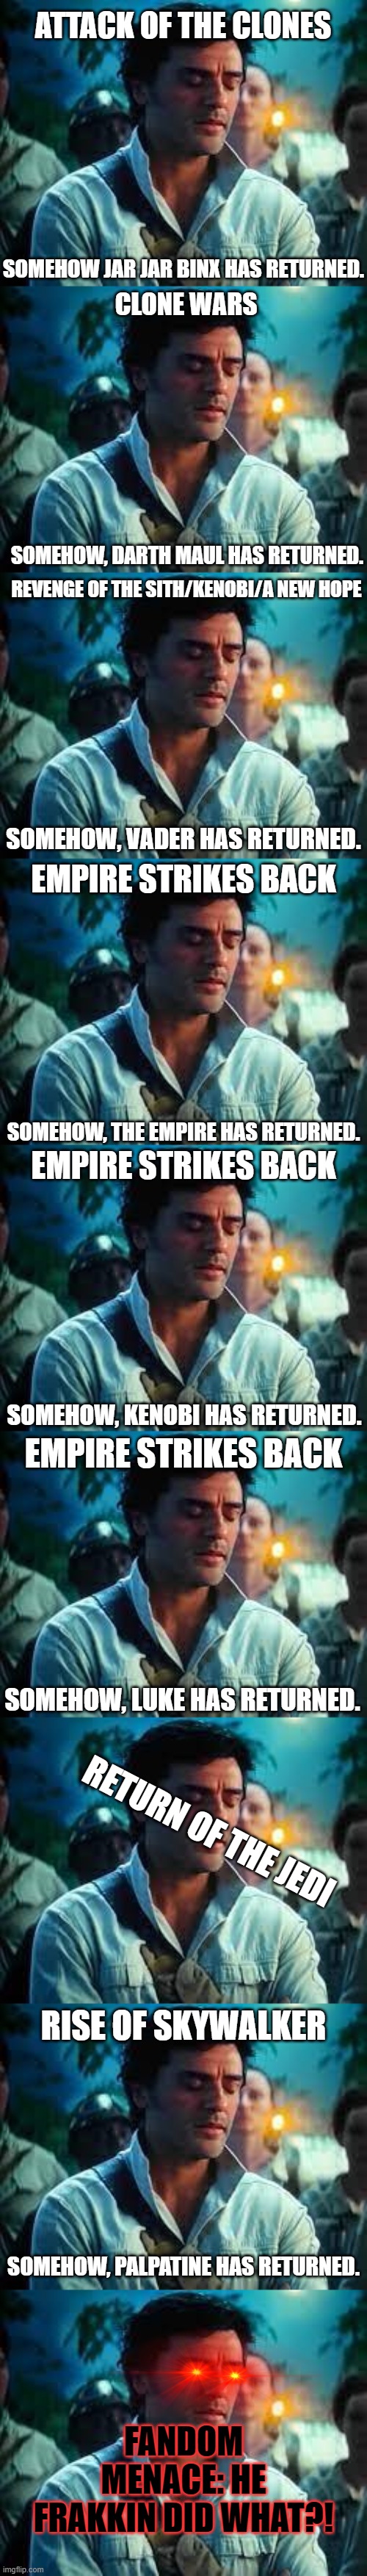 ATTACK OF THE CLONES; SOMEHOW JAR JAR BINX HAS RETURNED. CLONE WARS; SOMEHOW, DARTH MAUL HAS RETURNED. REVENGE OF THE SITH/KENOBI/A NEW HOPE; SOMEHOW, VADER HAS RETURNED. EMPIRE STRIKES BACK; SOMEHOW, THE EMPIRE HAS RETURNED. EMPIRE STRIKES BACK; SOMEHOW, KENOBI HAS RETURNED. EMPIRE STRIKES BACK; SOMEHOW, LUKE HAS RETURNED. RETURN OF THE JEDI; RISE OF SKYWALKER; SOMEHOW, PALPATINE HAS RETURNED. FANDOM MENACE: HE FRAKKIN DID WHAT?! | image tagged in somehow palpatine returned,star wars,jar jar binks,darth vader,luke skywalker,palpatine | made w/ Imgflip meme maker